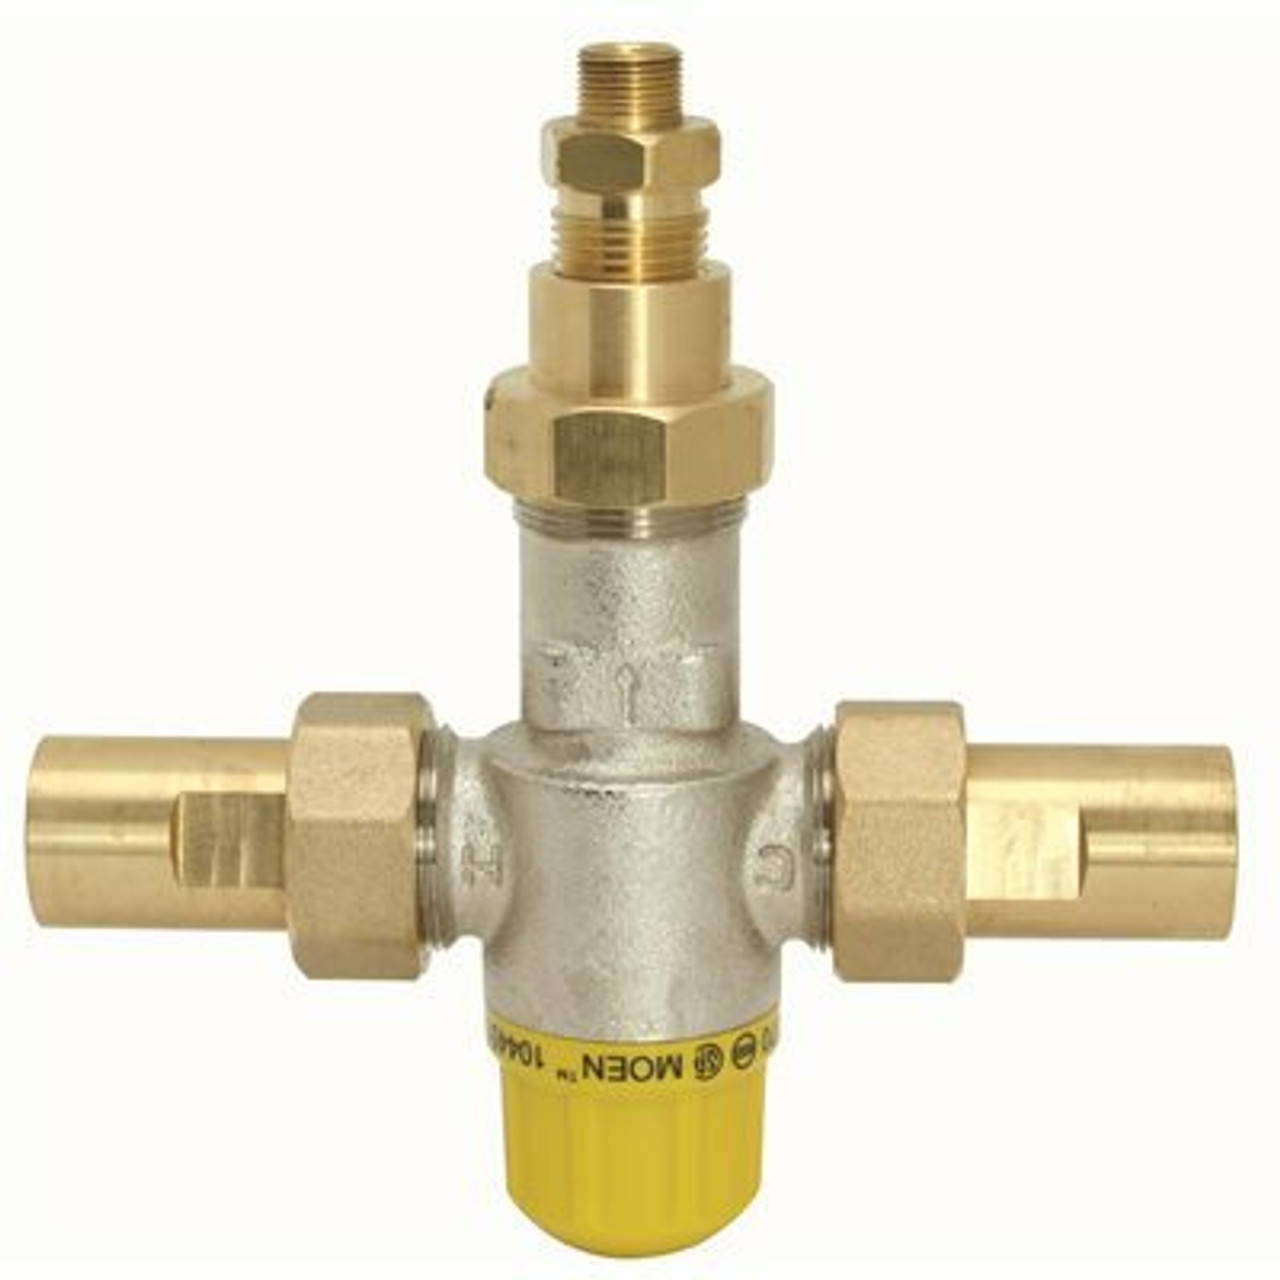 Moen Commercial 3/8 In. X 3/8 In. Thermostatic Mixing Valve With Compression Fittings